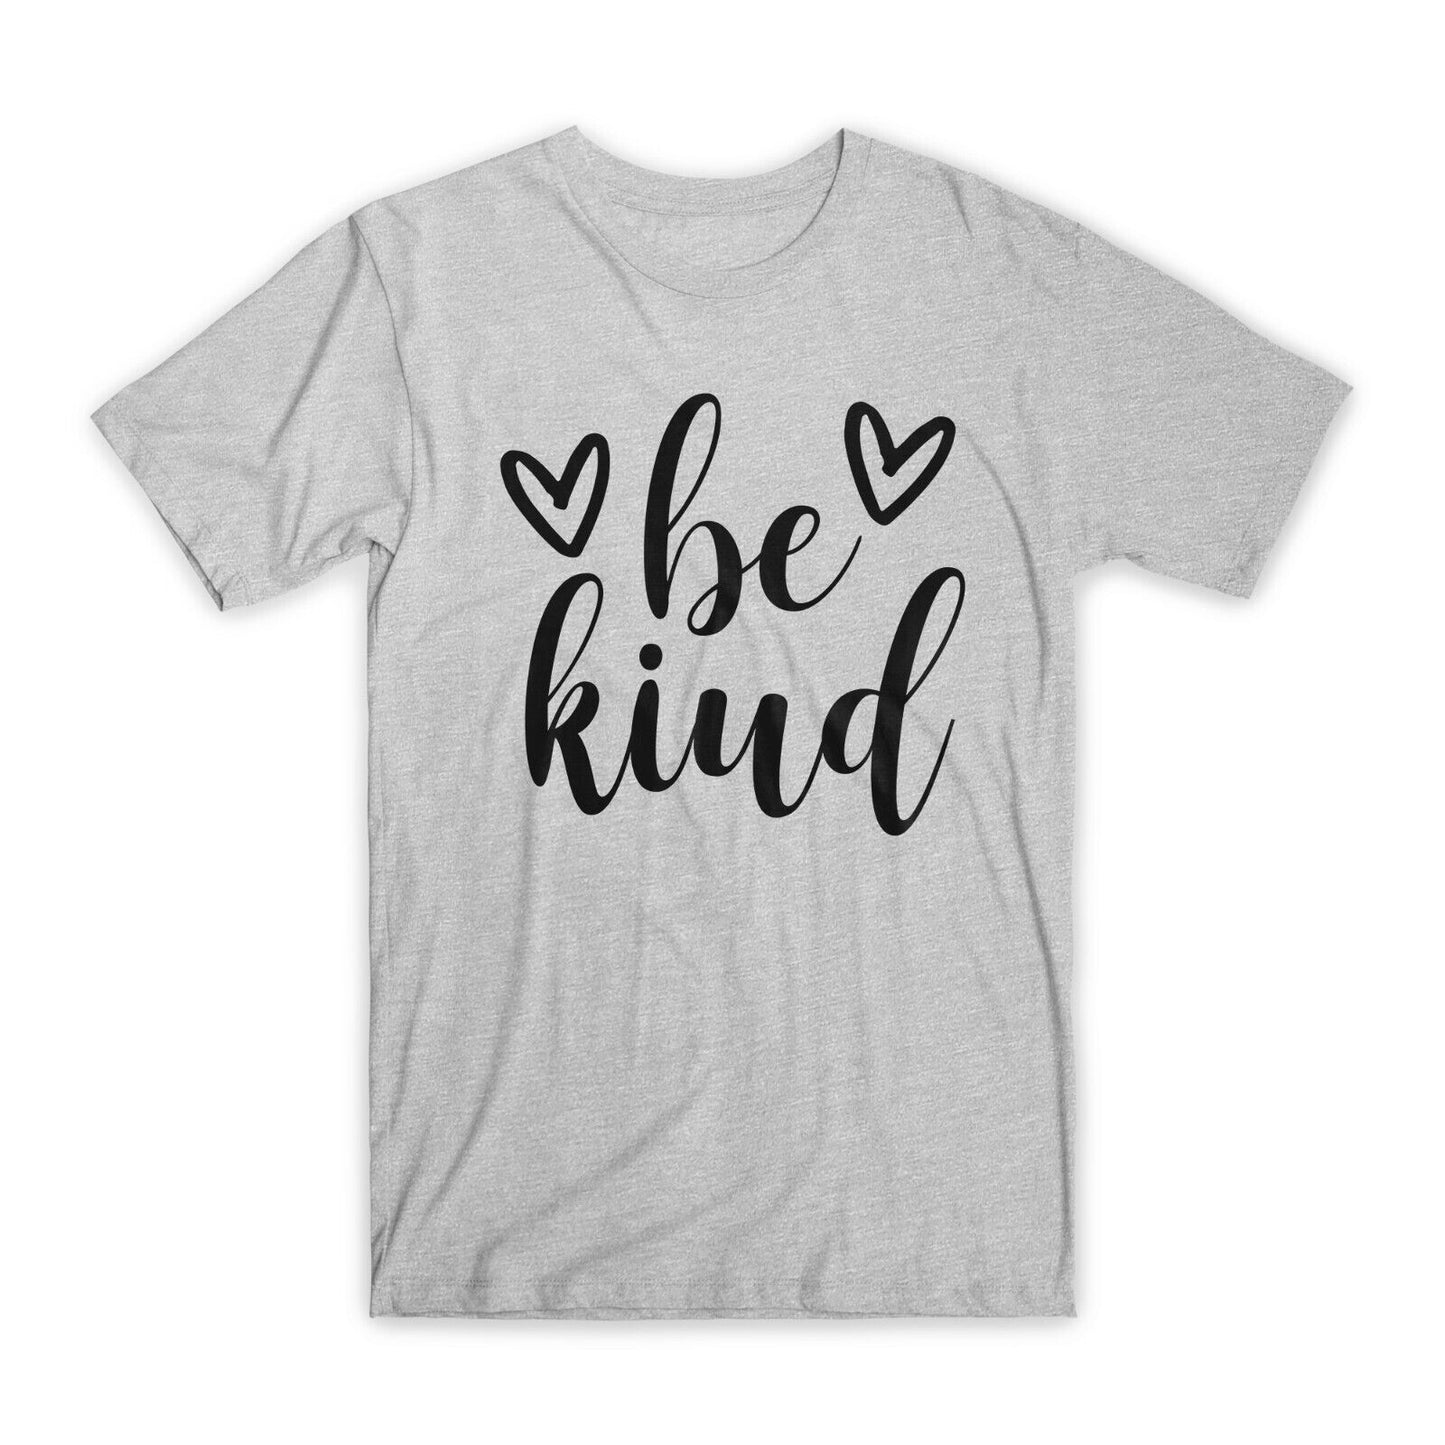 Be Kind Printed T-Shirt Premium Soft Cotton Crew Neck Funny Tee Novelty Gift NEW